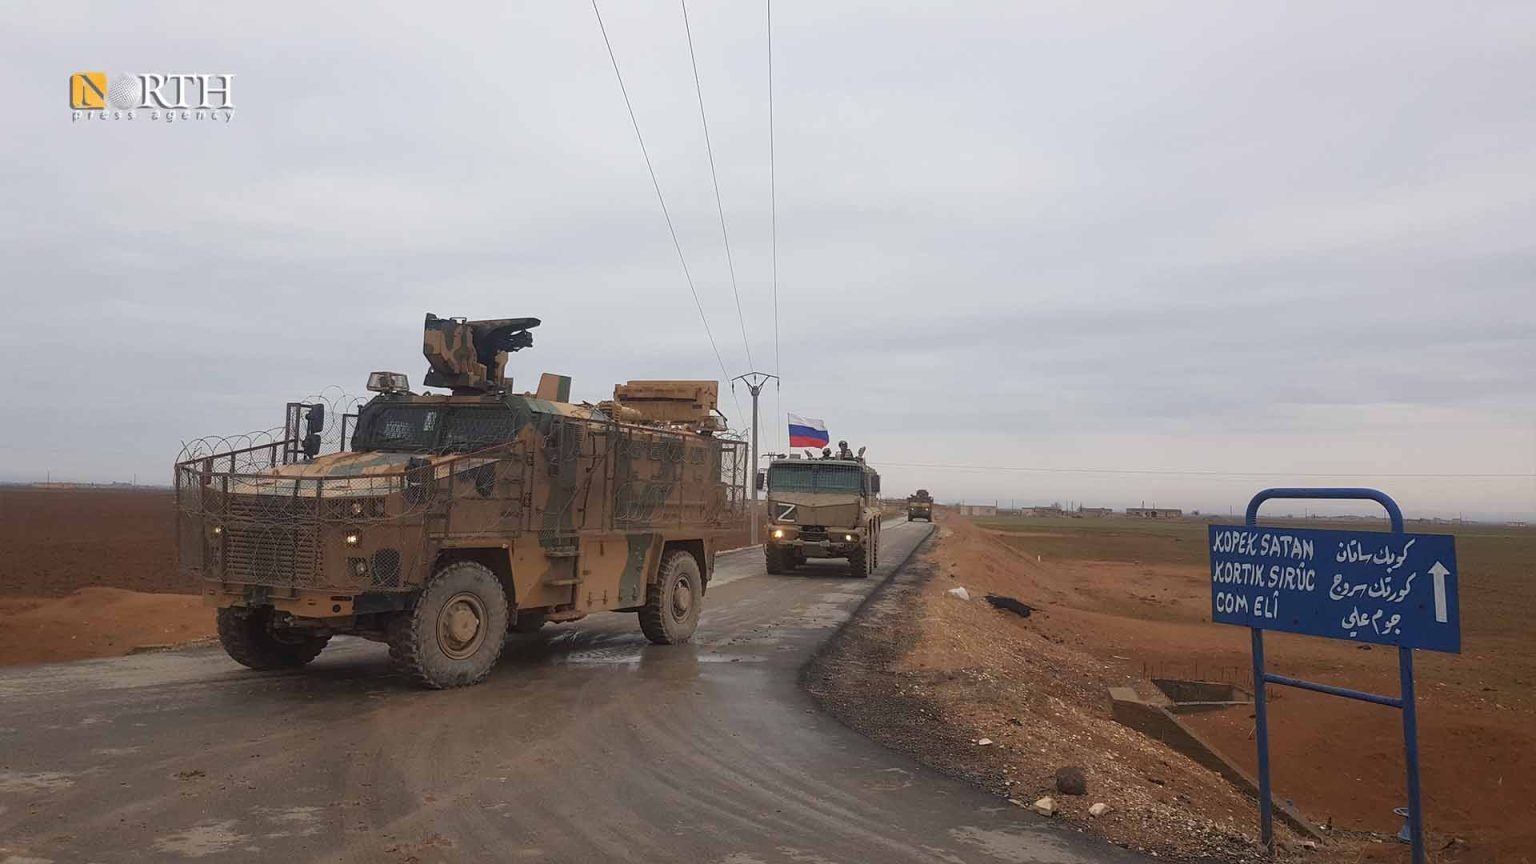 Turkish-Russian forces conduct joint patrol in Kobani